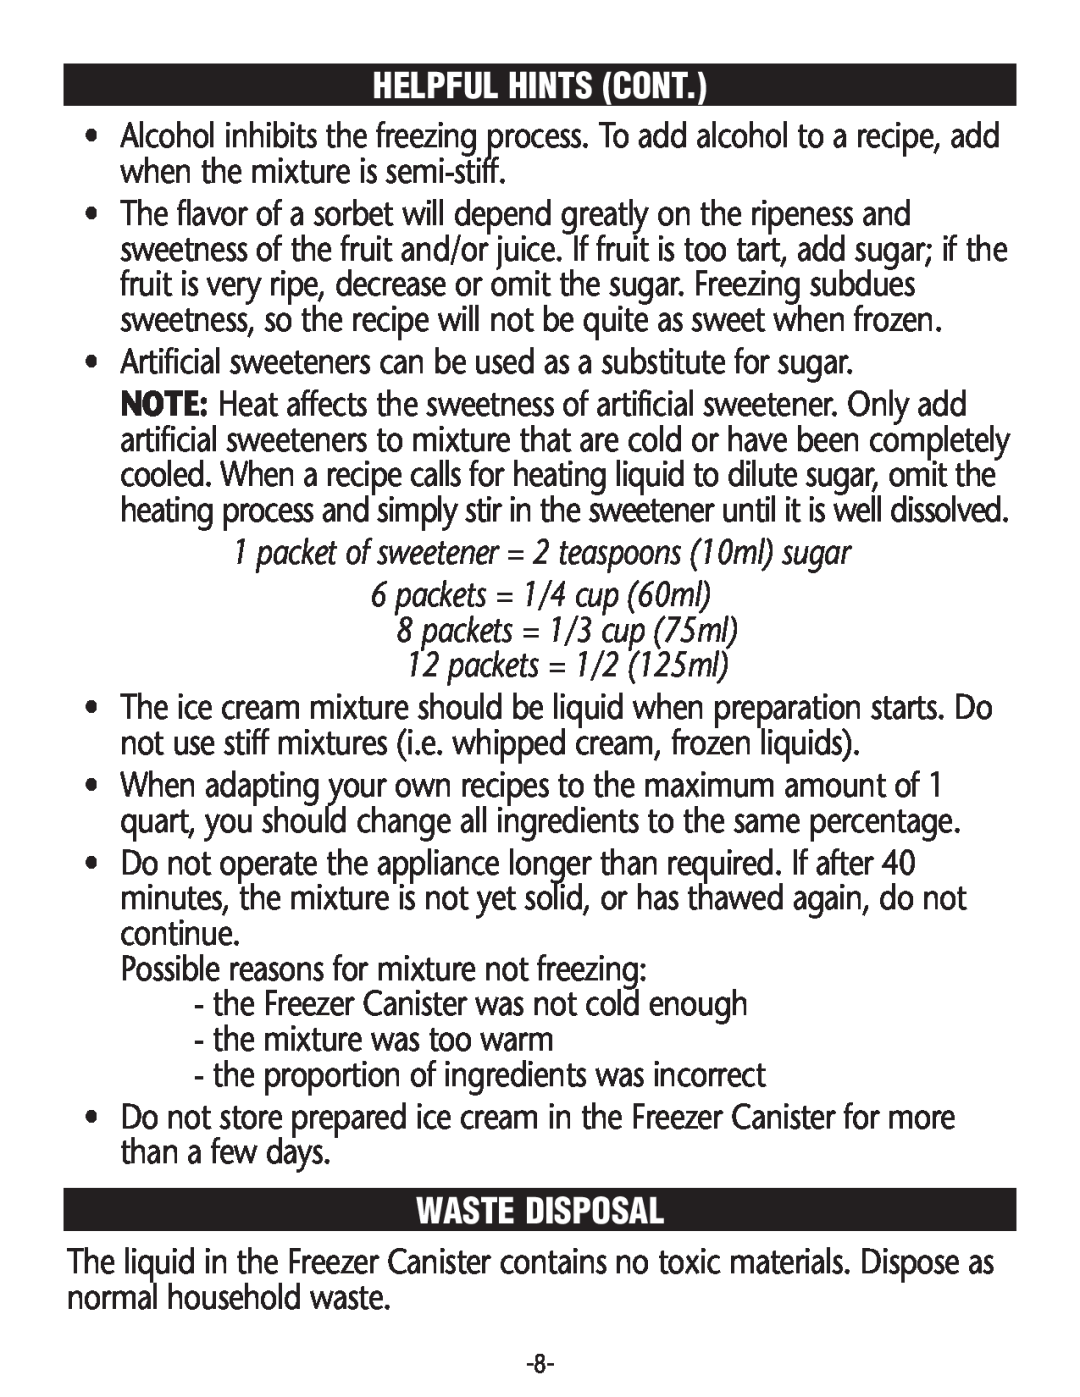 Rival GC8101, GC8151 Helpful Hints Cont, Waste Disposal, packet of sweetener = 2 teaspoons 10ml sugar, packets = 1/2 125ml 